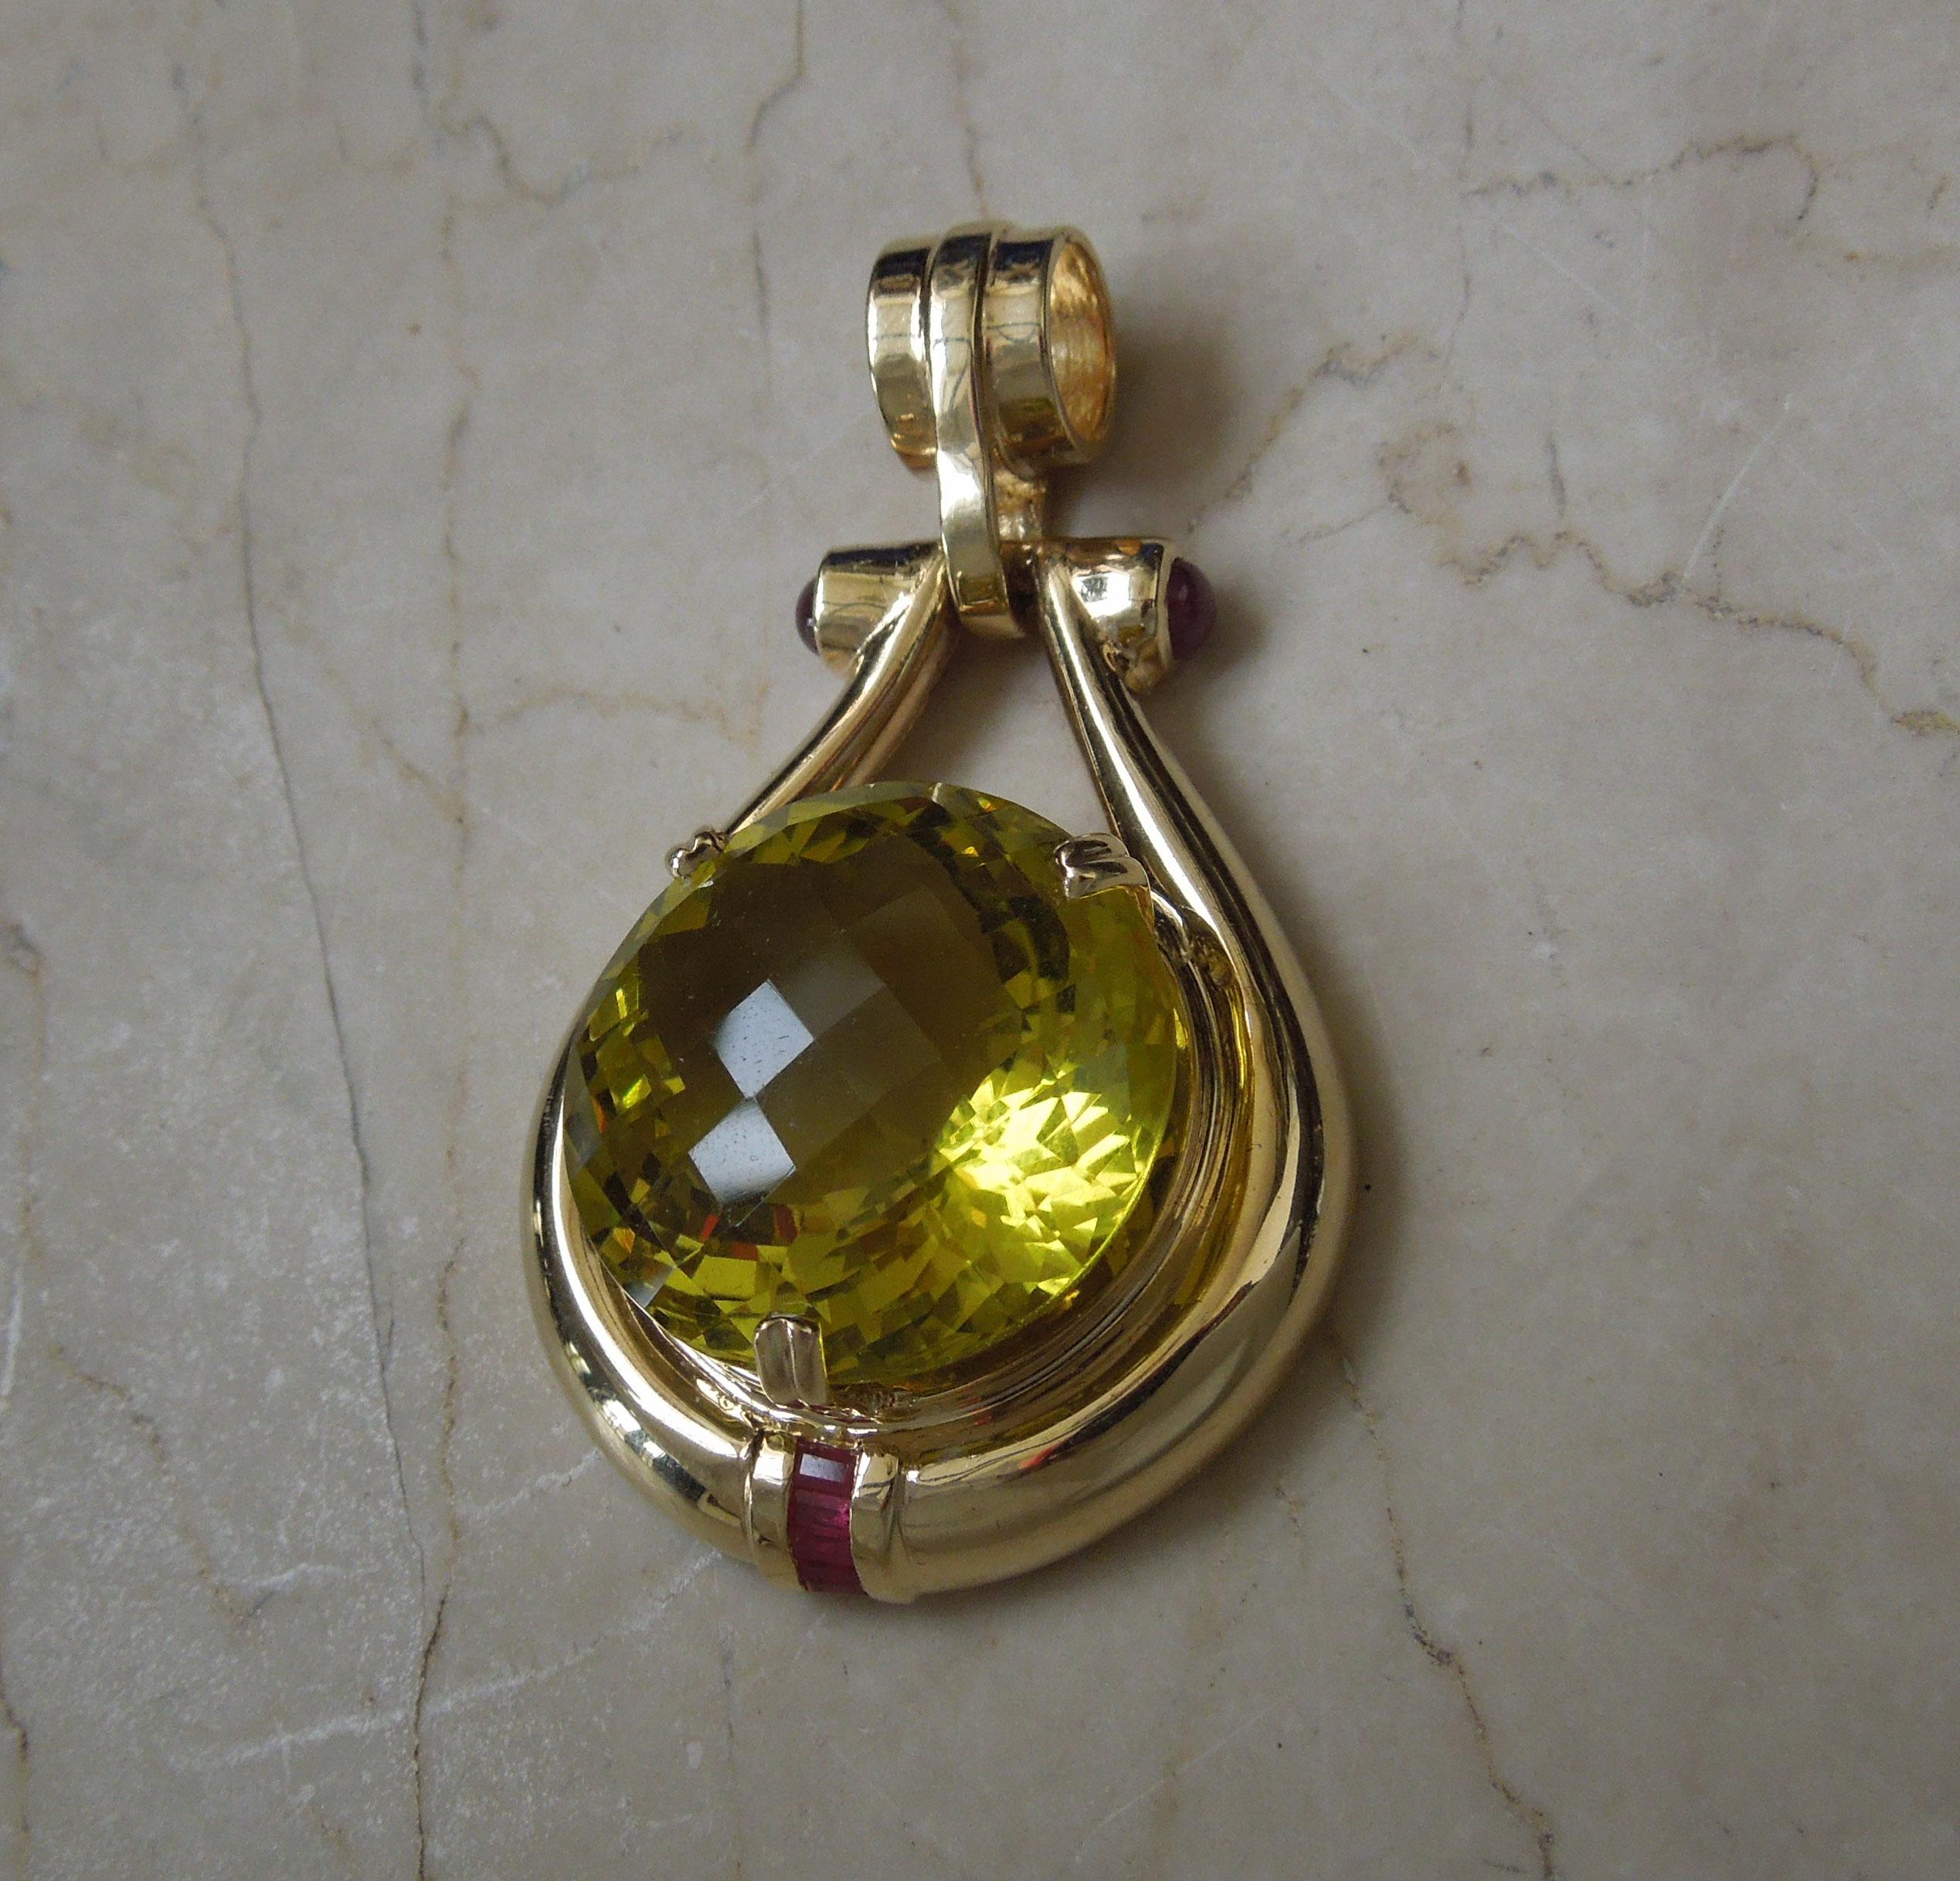 Constructed completely of 14KT Yellow Gold
in a Retro Inspired design

with 1 Focal G.I.A. Certified Faceted Natural Lemon Citrine / Lemon Quartz
weighing approximately 40.00 carats
Secured in 3 Doubled Prongs

Accented with 2 Bezel set Round